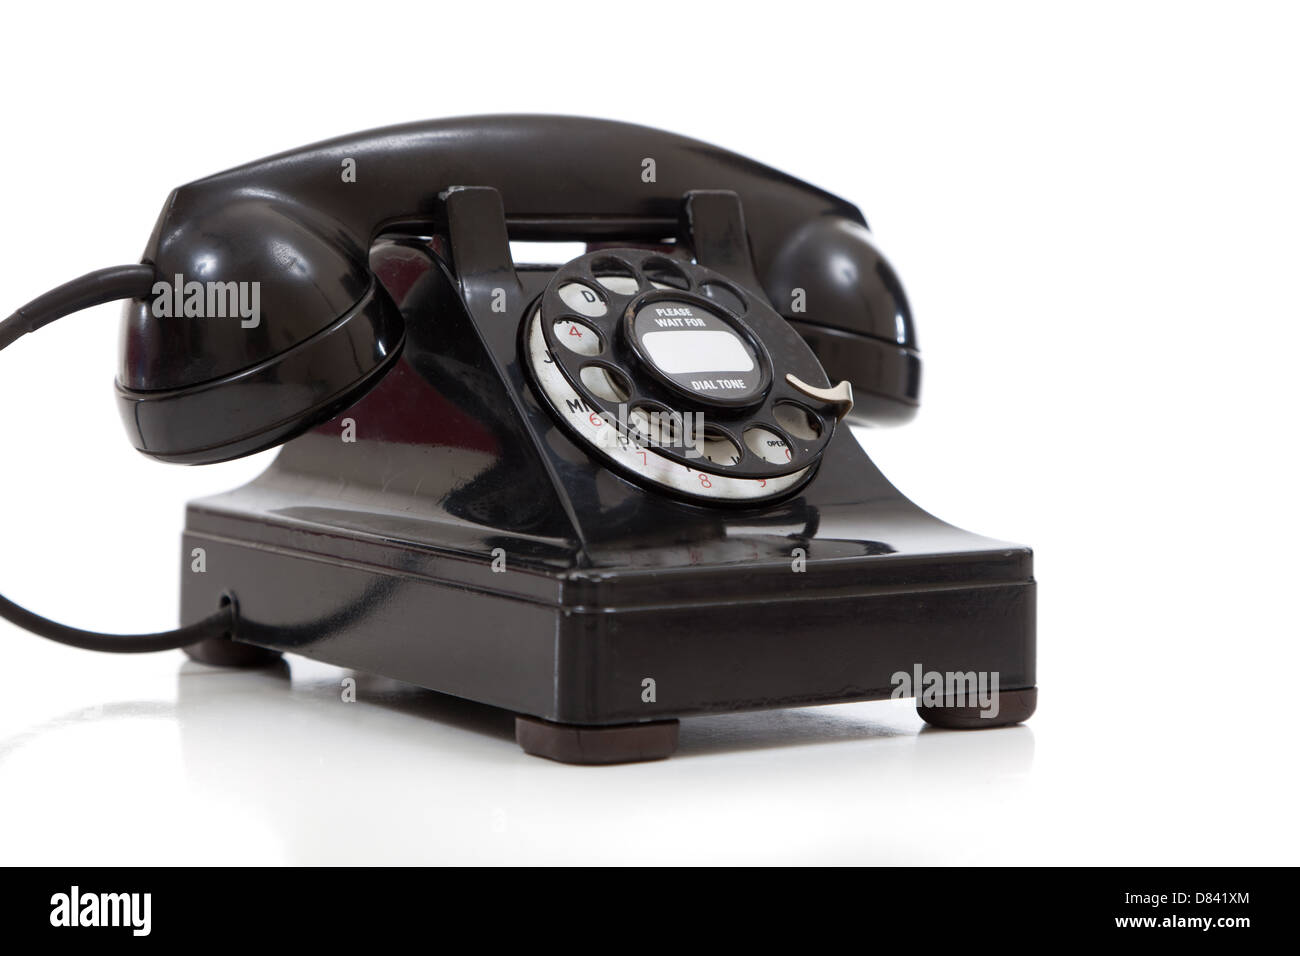 A vintage black rotary phone on a white background Stock Photo